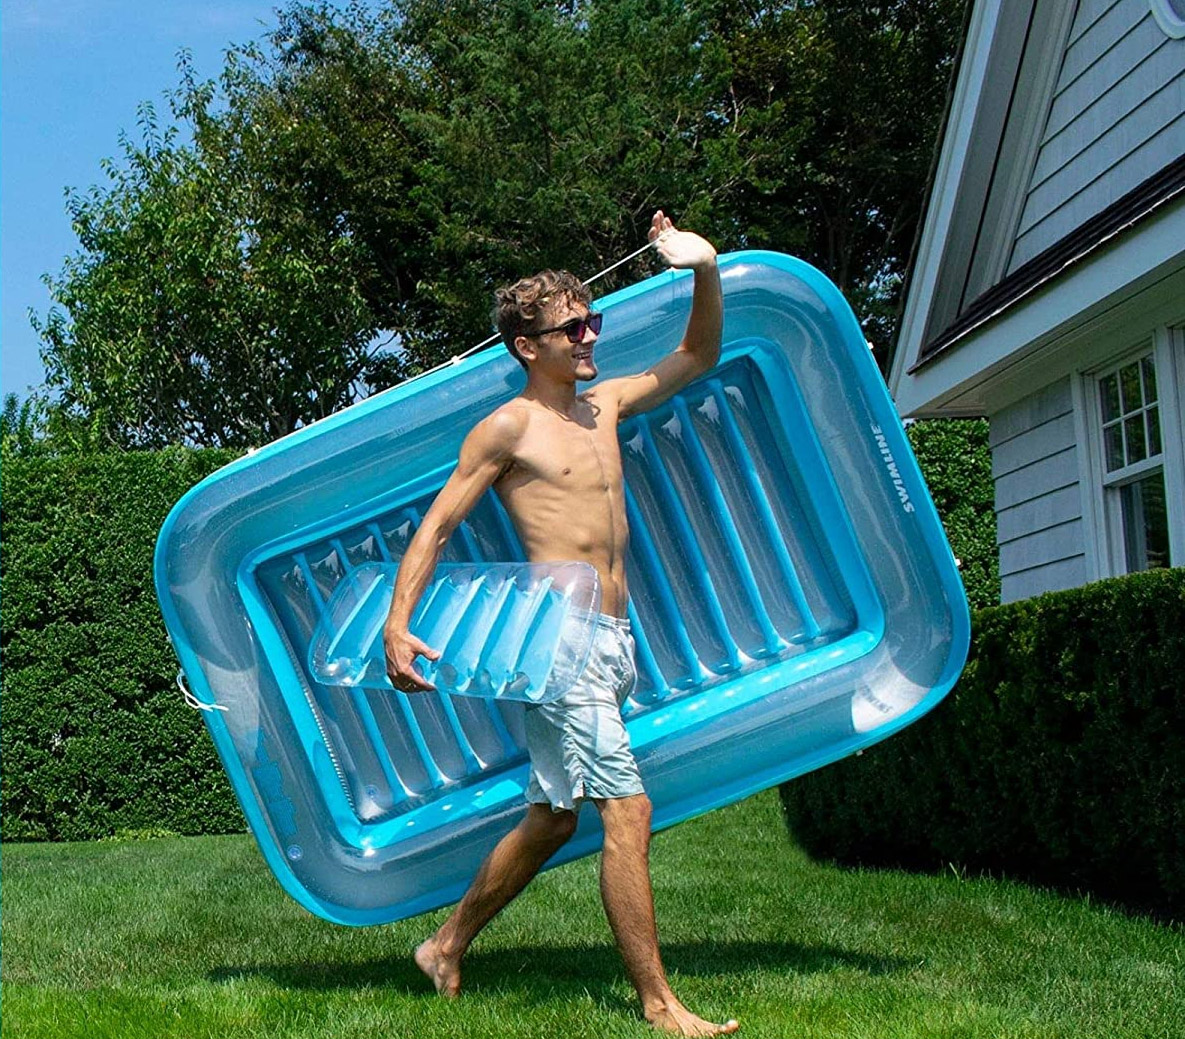 Inflatable Sunbathing Pool Lounger That Doubles as Mini Pool